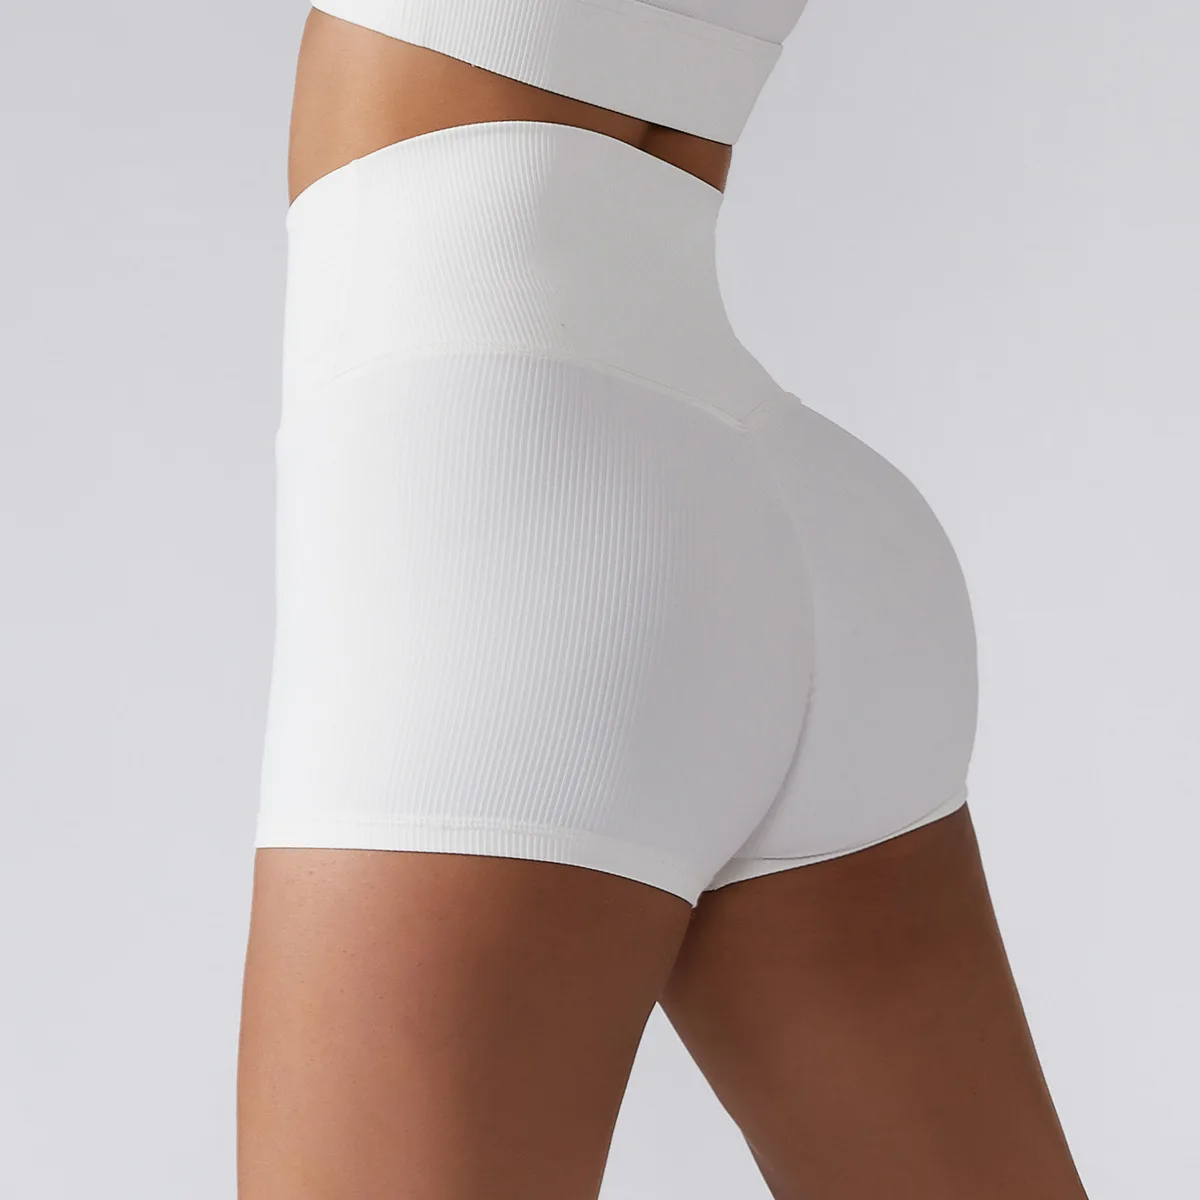 

2022 spring new pure white abdominal sports fitness shorts buttocks nude yoga pants women's high waist lift tight shorts